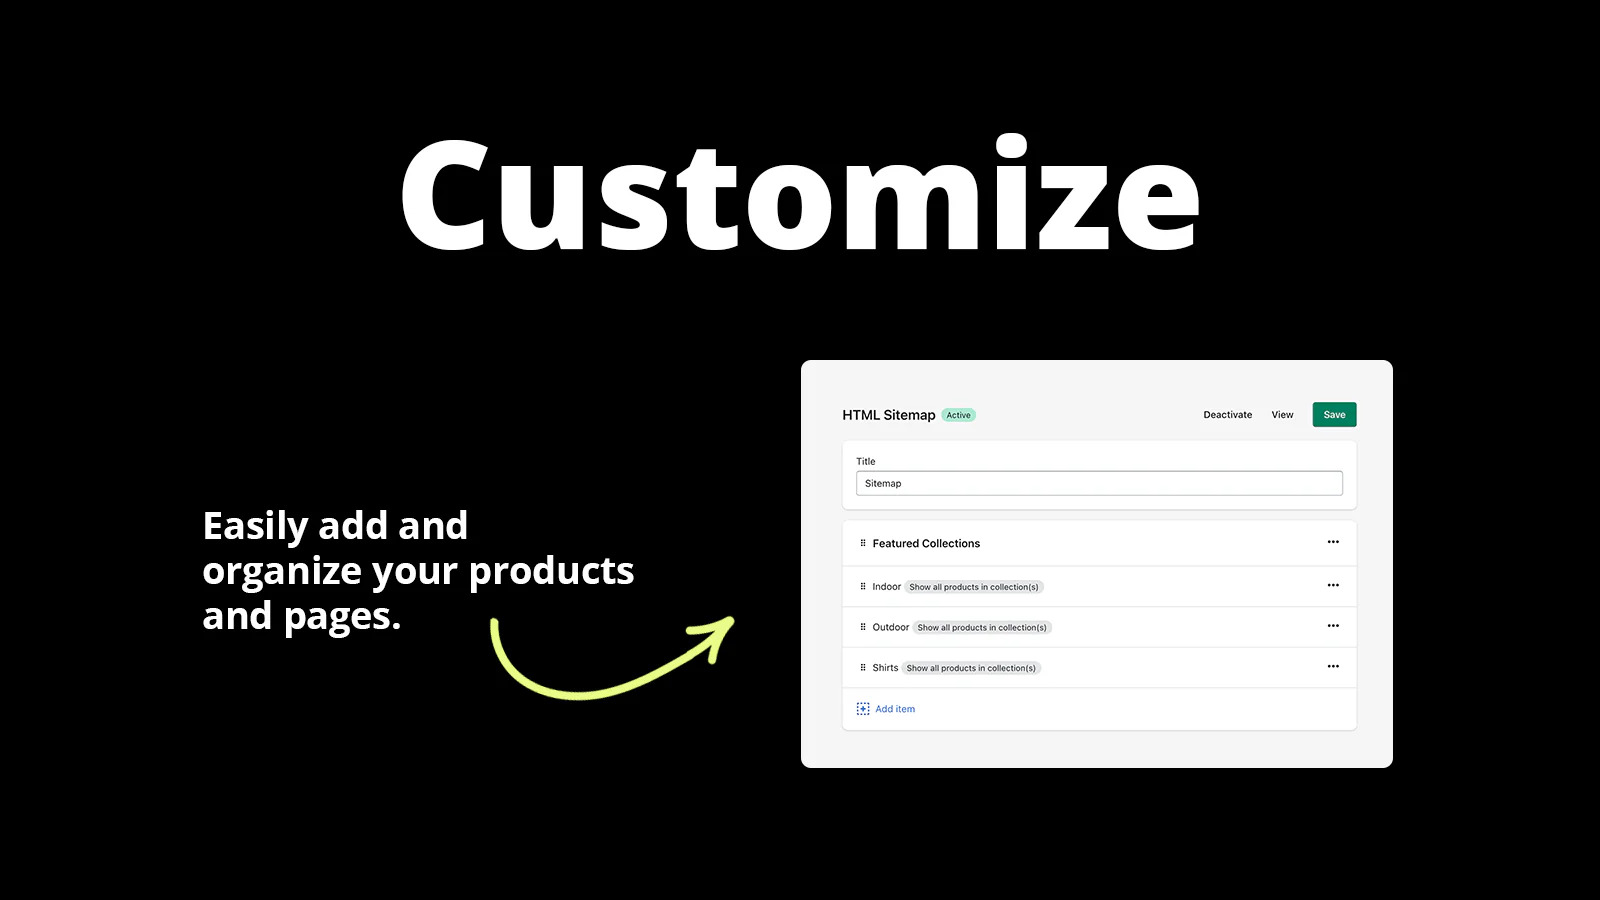 Customize. Easily add and organize your products and pages.